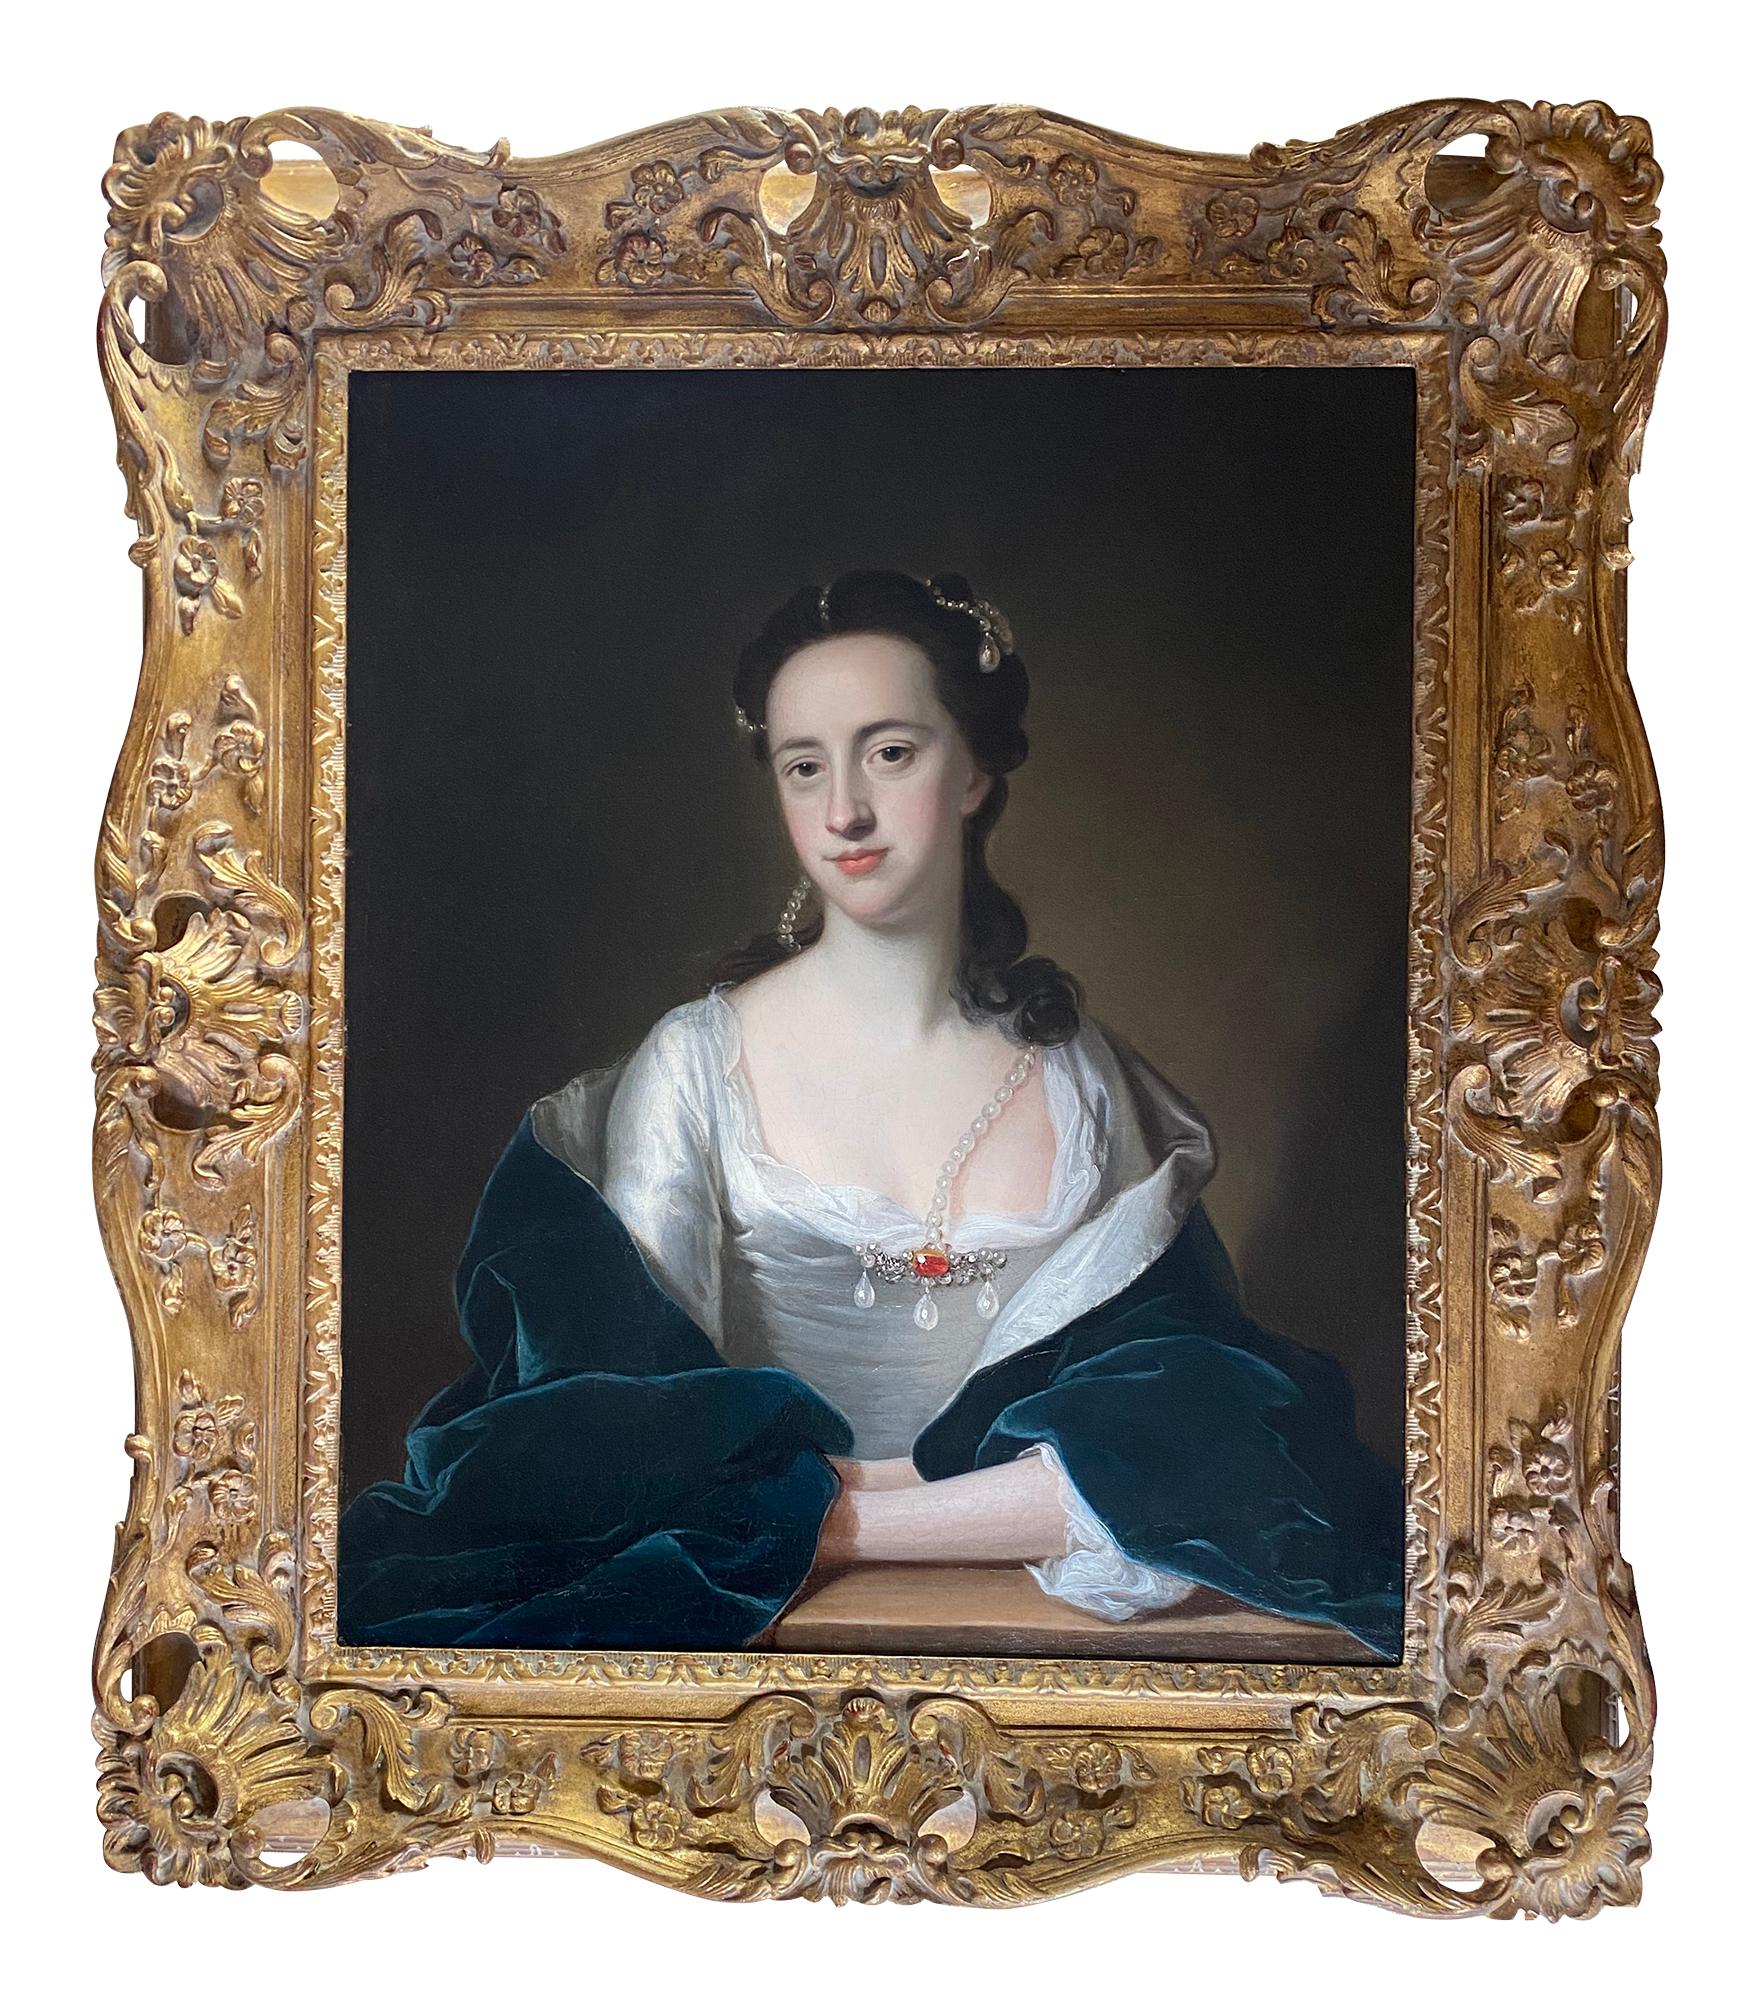 Thomas Hudson Portrait Painting - 18TH CENTURY ENGLISH PORTRAIT OF A LADY IN WHITE DRESS AND BLUE CLOAK 